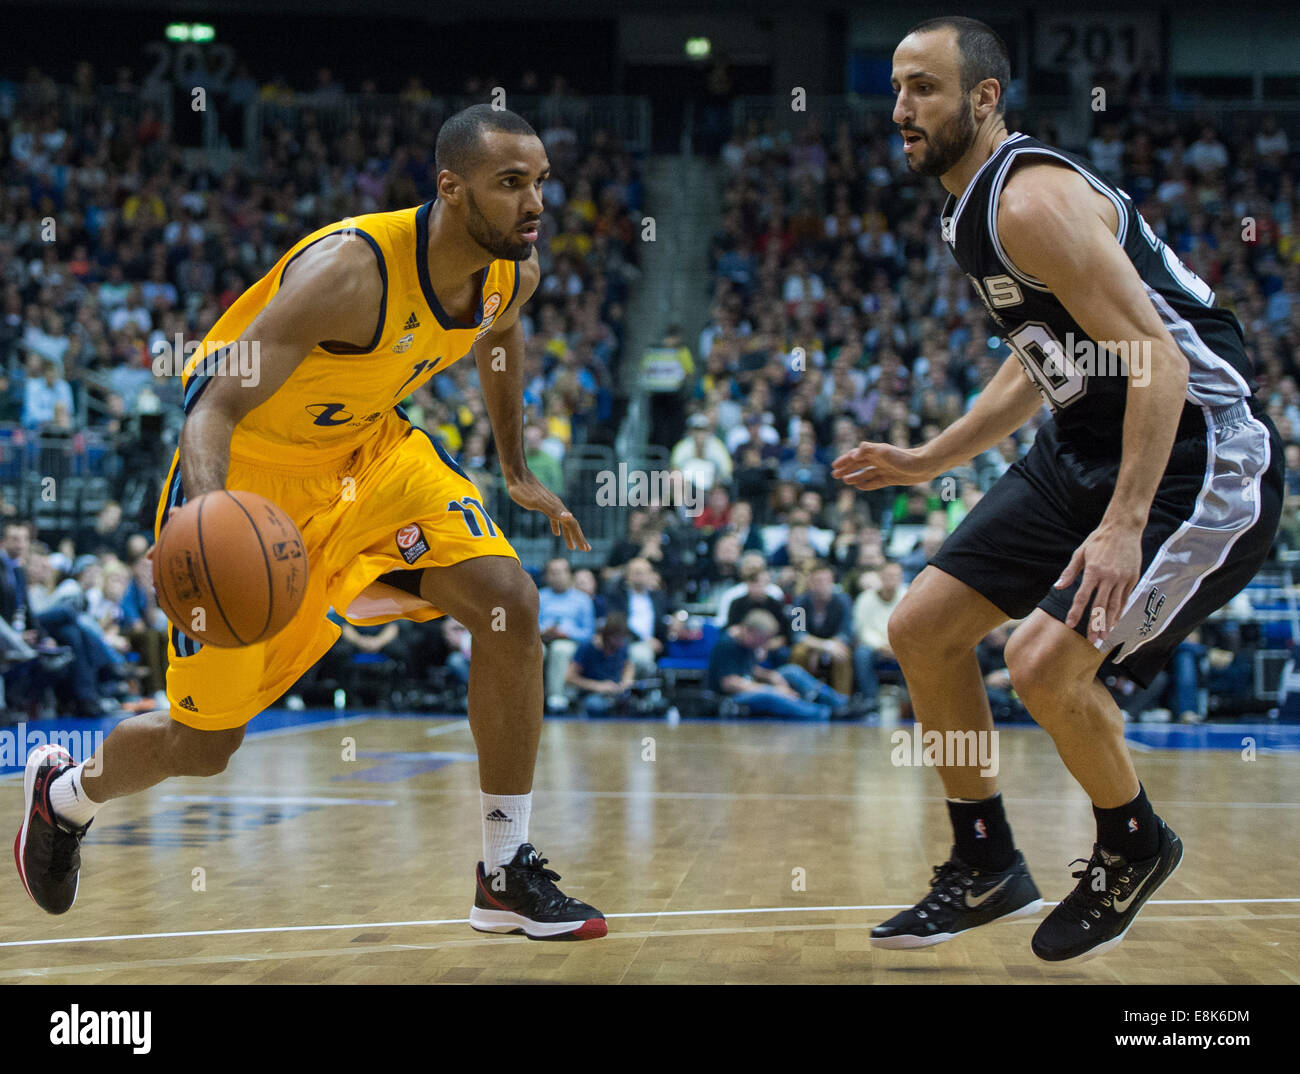 Berlin, Germany. 08th Oct, 2014. Akeem Vargas (L) of Alba Berlin and Manu Ginobili of the San Antonio Spurs in action during the NBA Global Games match between Alba Berlin and San Antonio Spurs at O2 World in Berlin, Germany, 08 October 2014. Alba Berlin won 94:93. Photo: Lukas Schulze/dpa/Alamy Live News Stock Photo